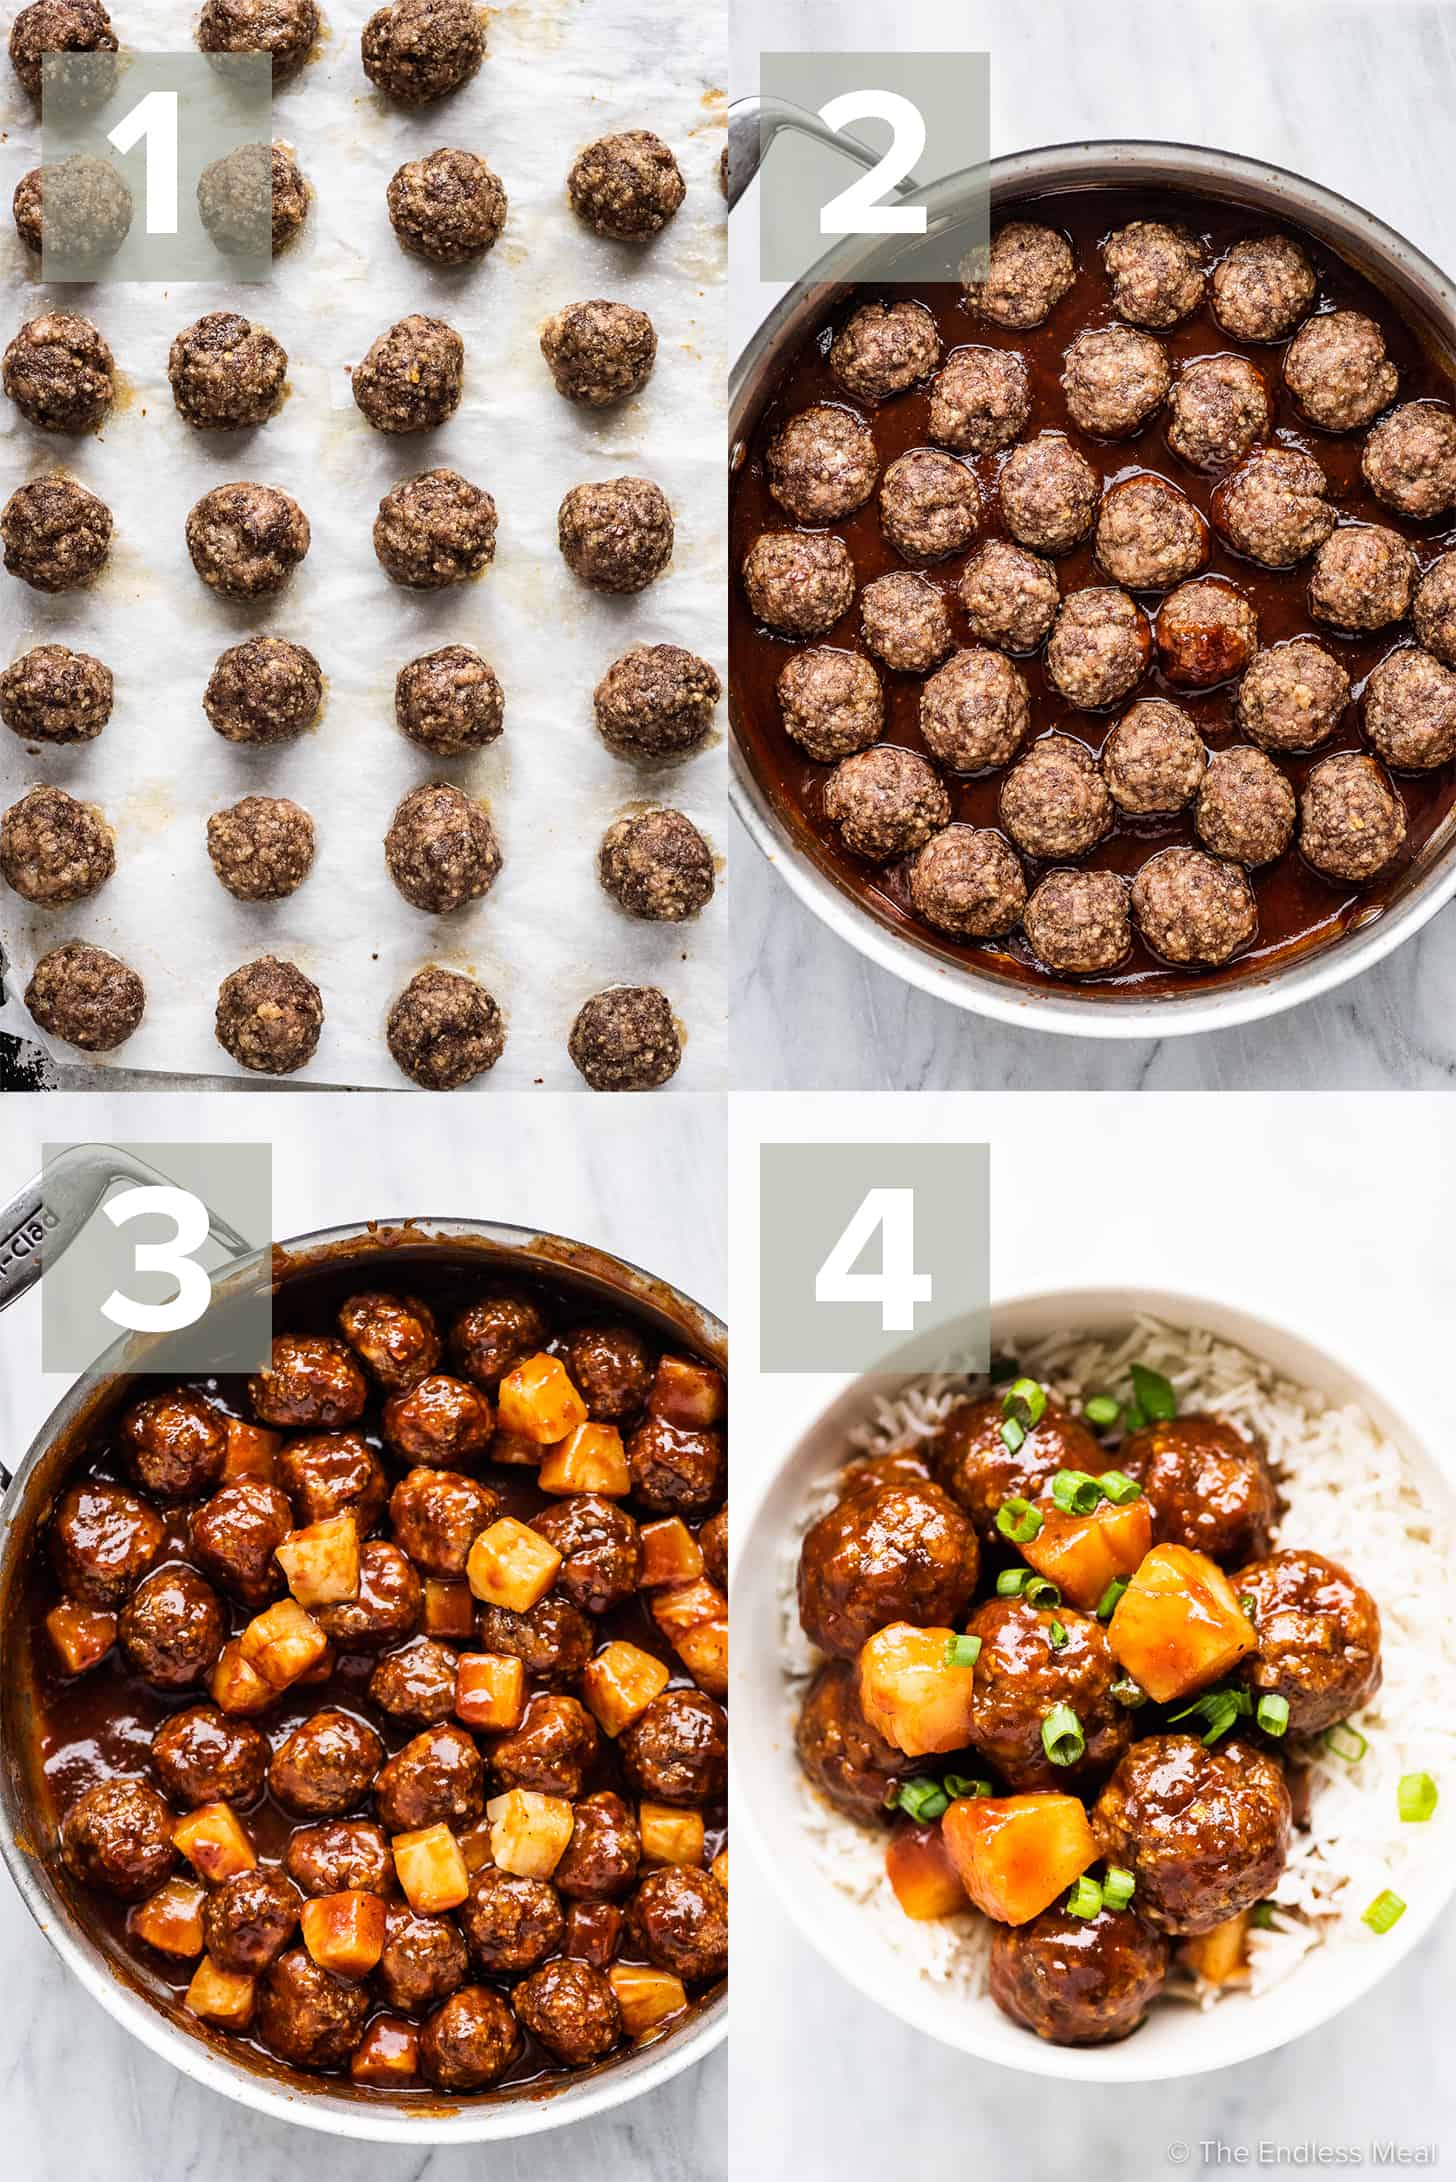 4 pictures showing how to make pineapple meatballs.